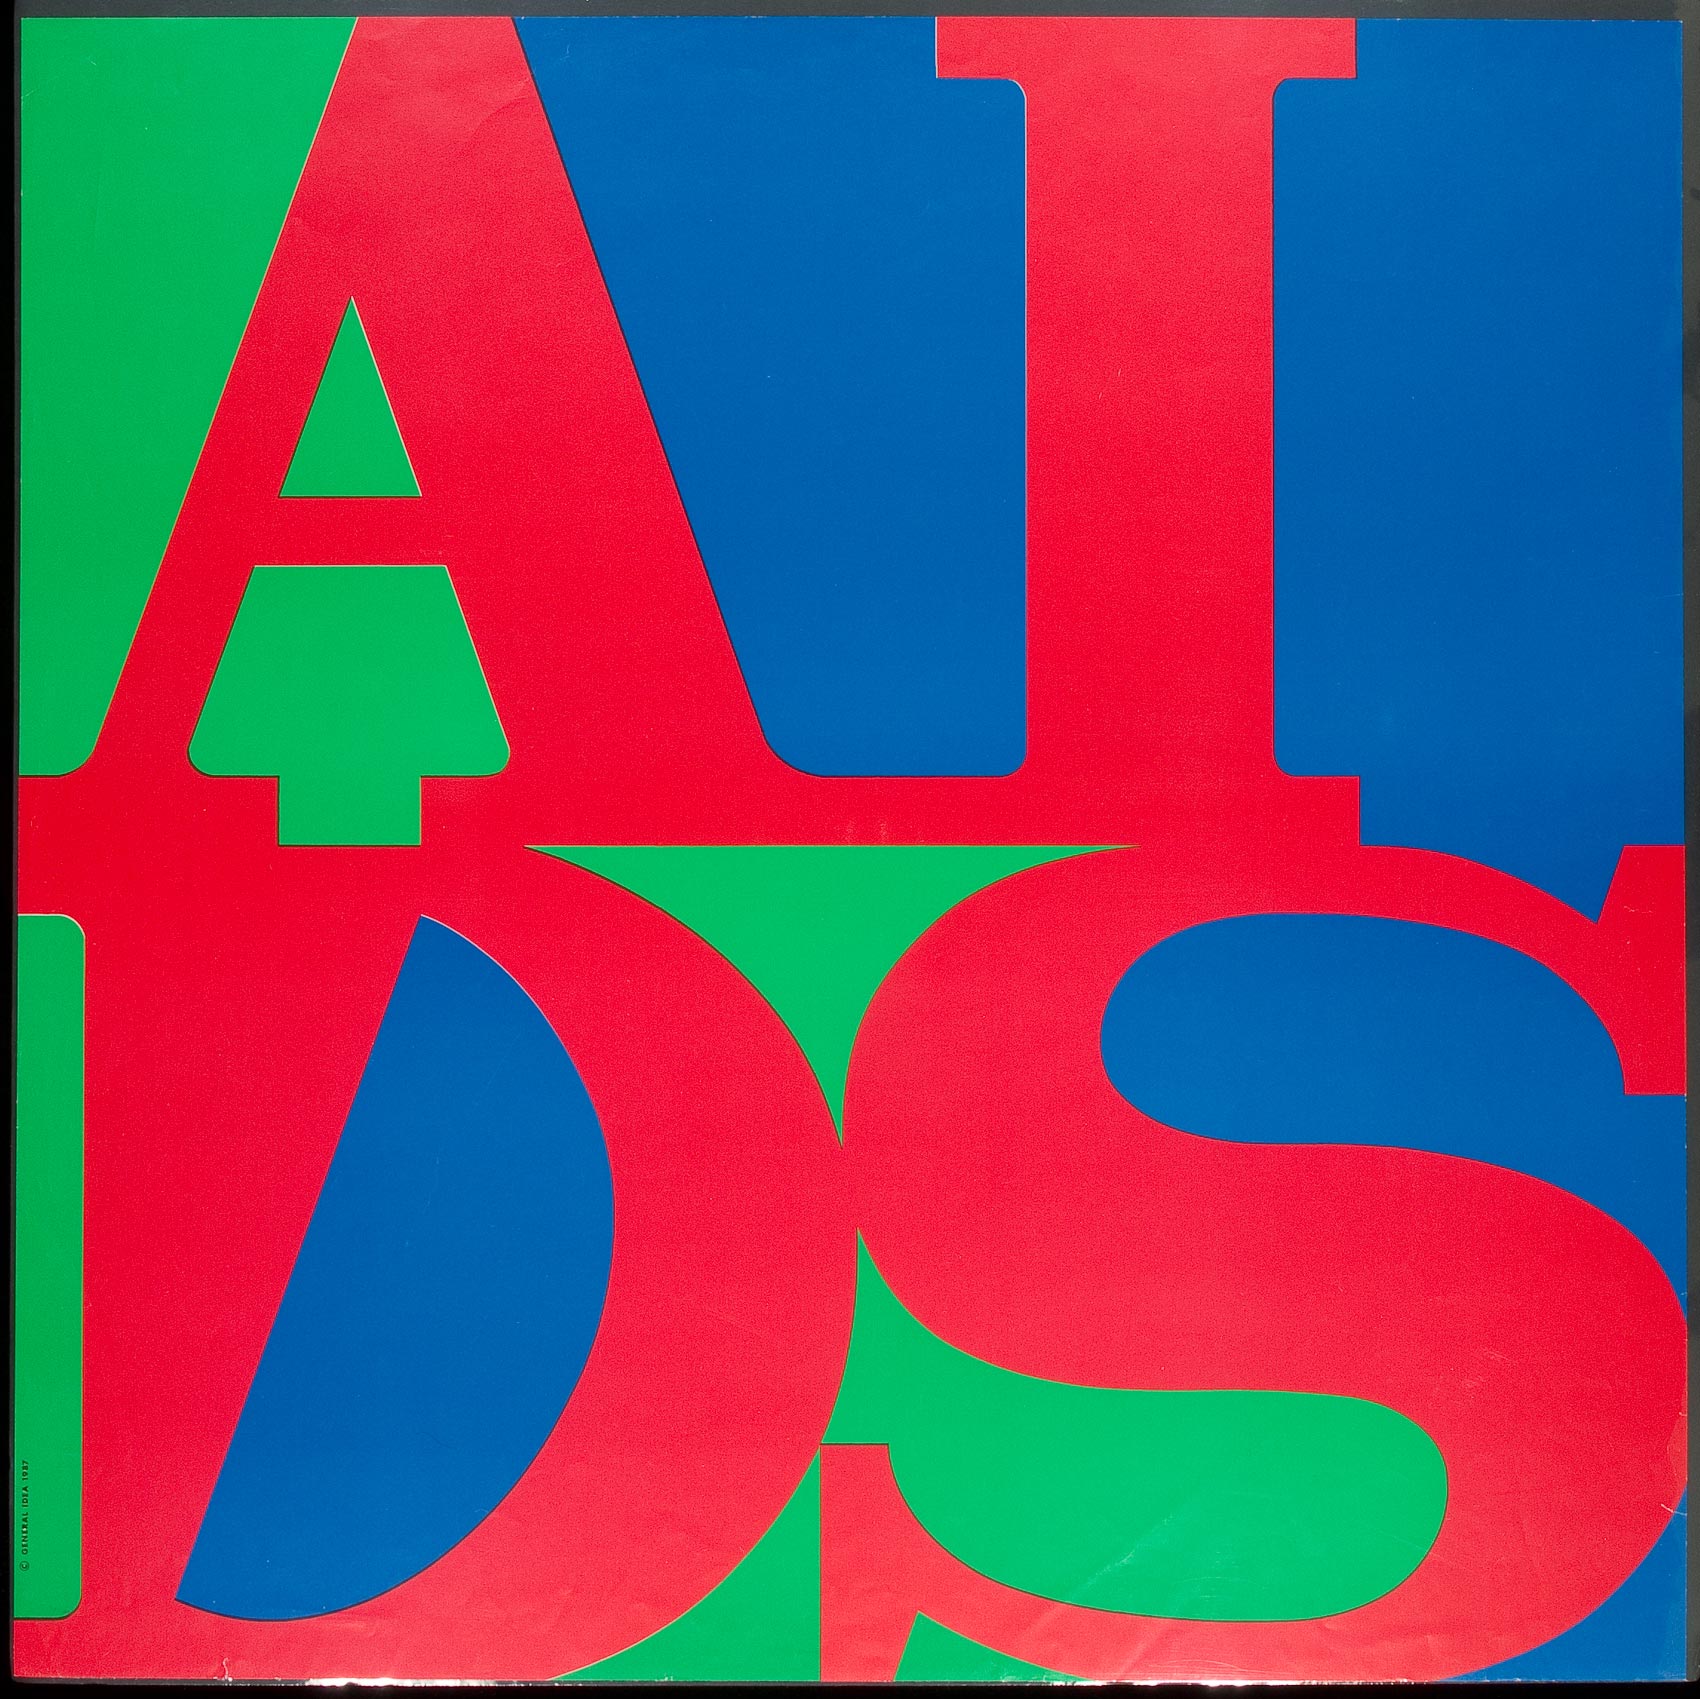 The letters a i d s in red serif font squished into a square surrounded by blue and green negative spaces.